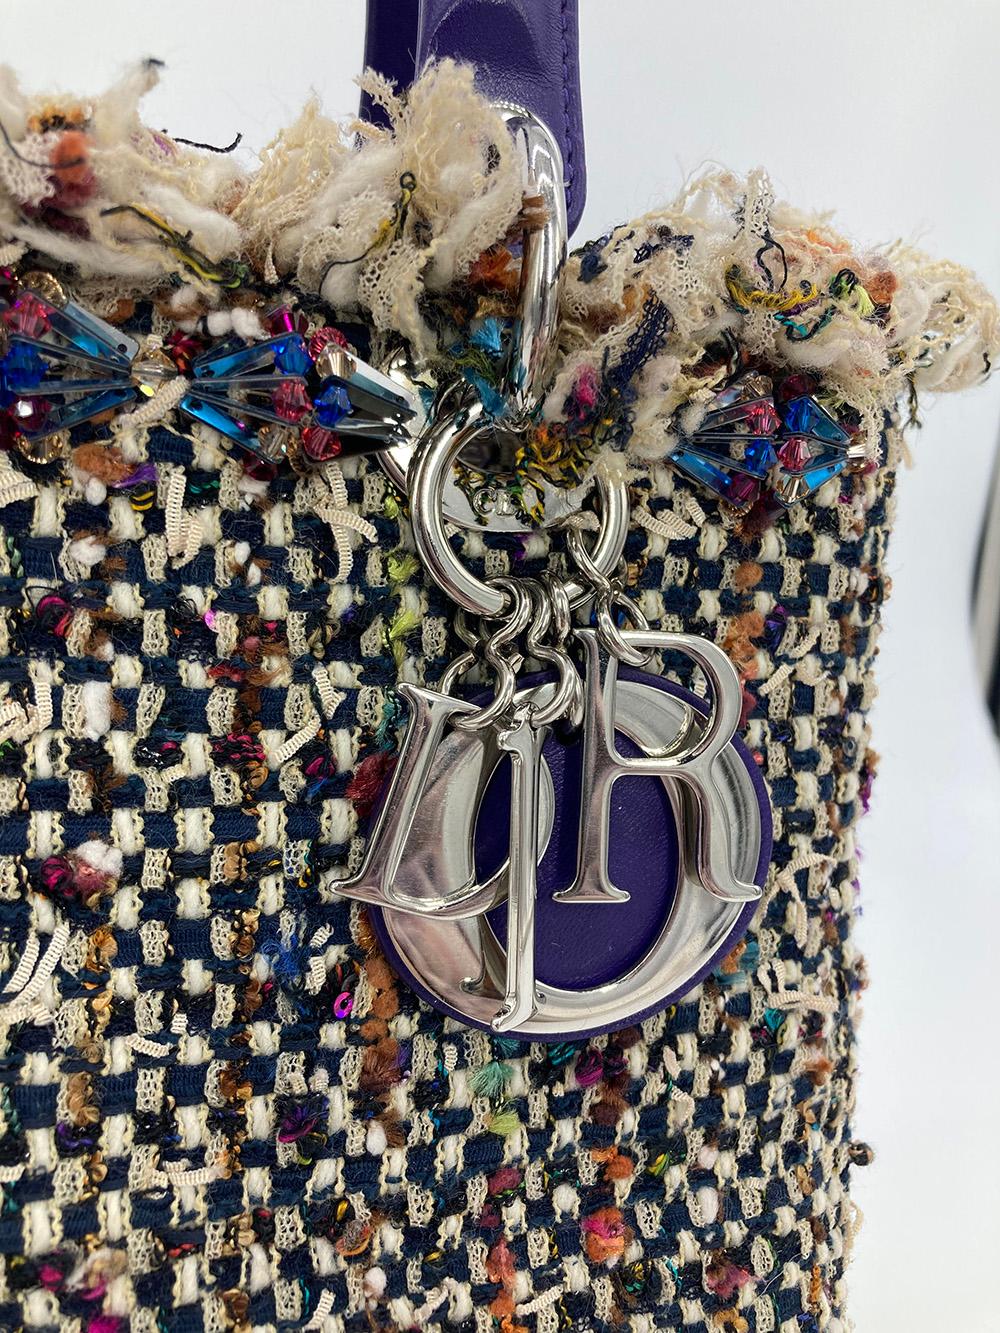 Christian Dior Woven Tweed Crystal Medium Lady Dior Bag in New without tag condition. Woven multi color tweed with purple leather trim and swarovski crystal details along top edge. Silver hardware. Top zipper closure opens to purple leather interior